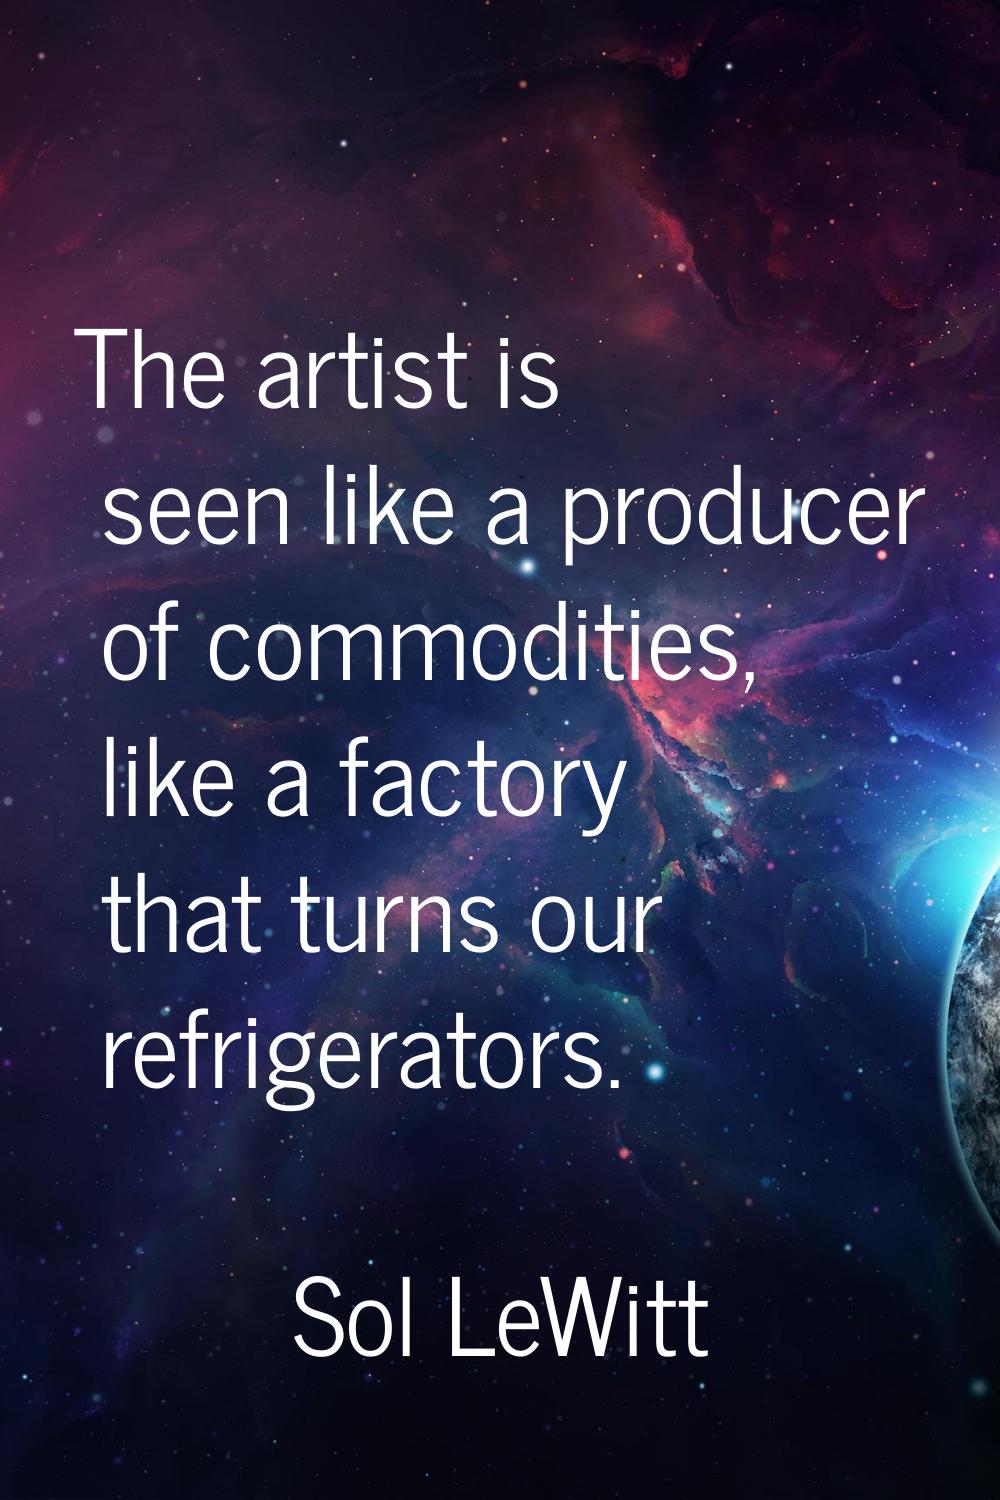 The artist is seen like a producer of commodities, like a factory that turns our refrigerators.